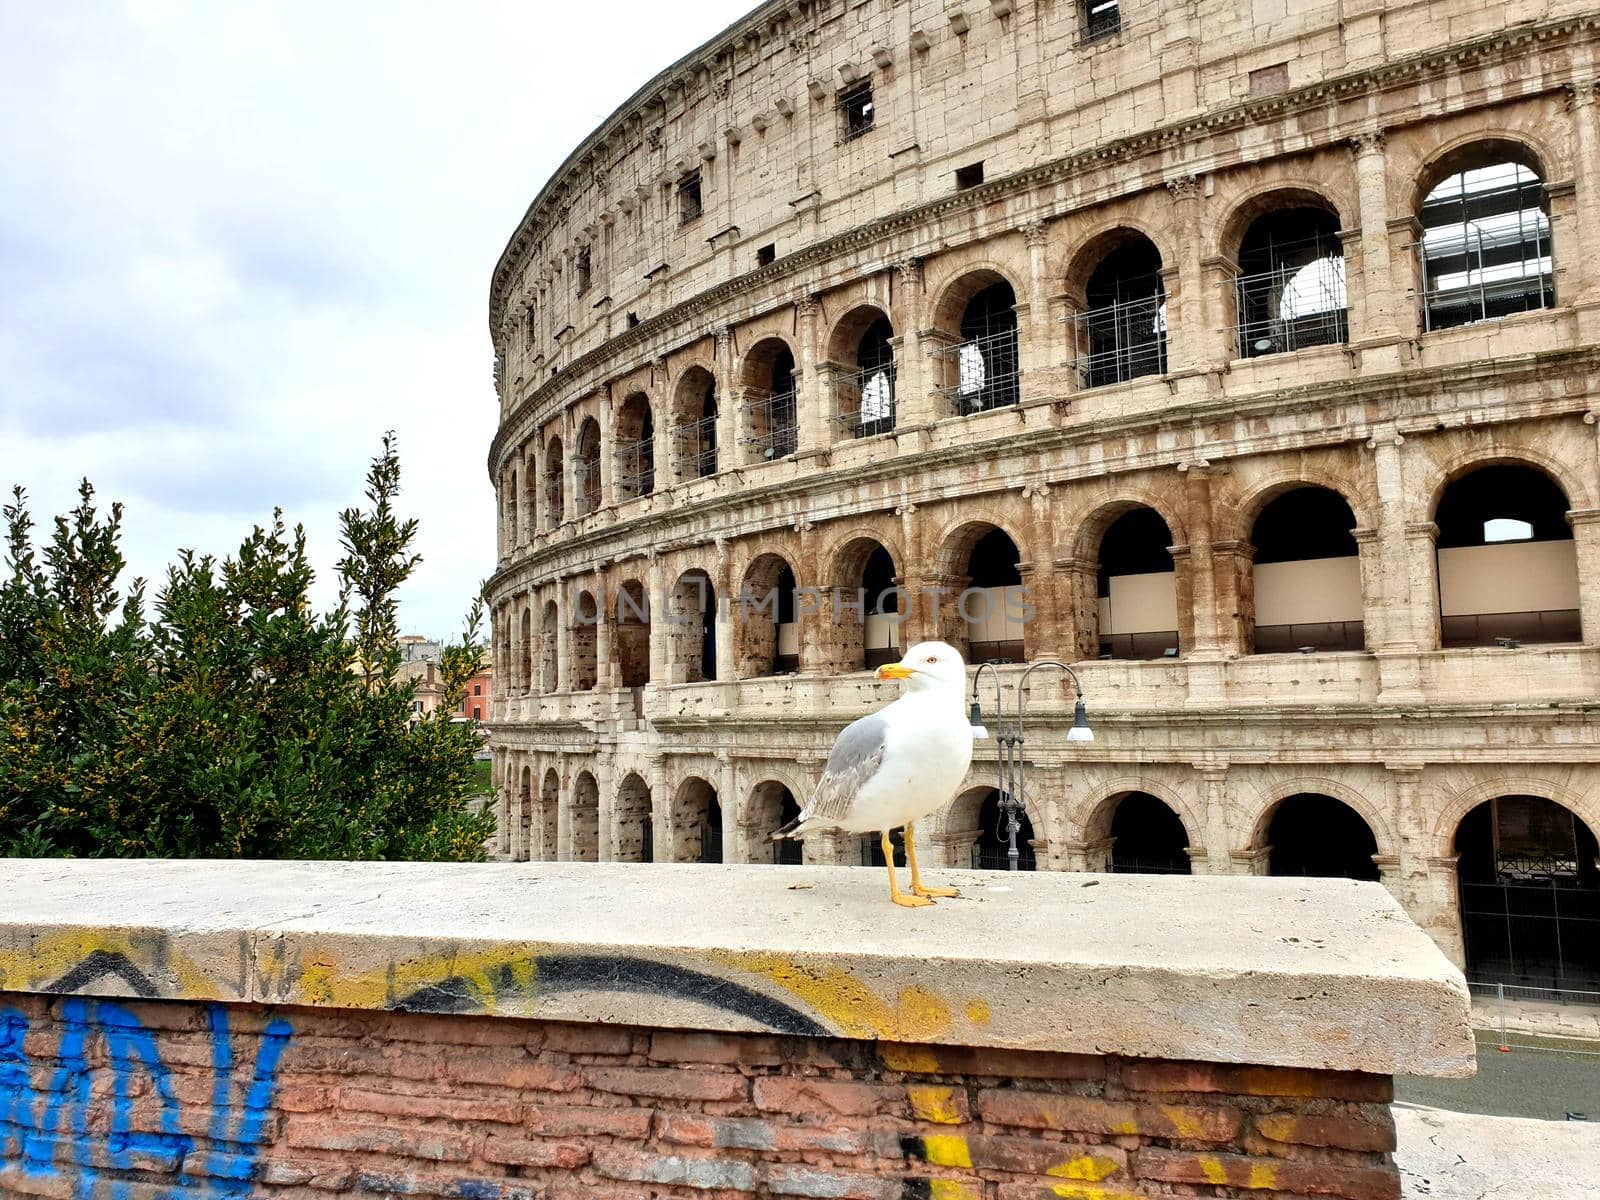 View of the Colosseum without tourists due to the quarantine, only a seagull by silentstock639